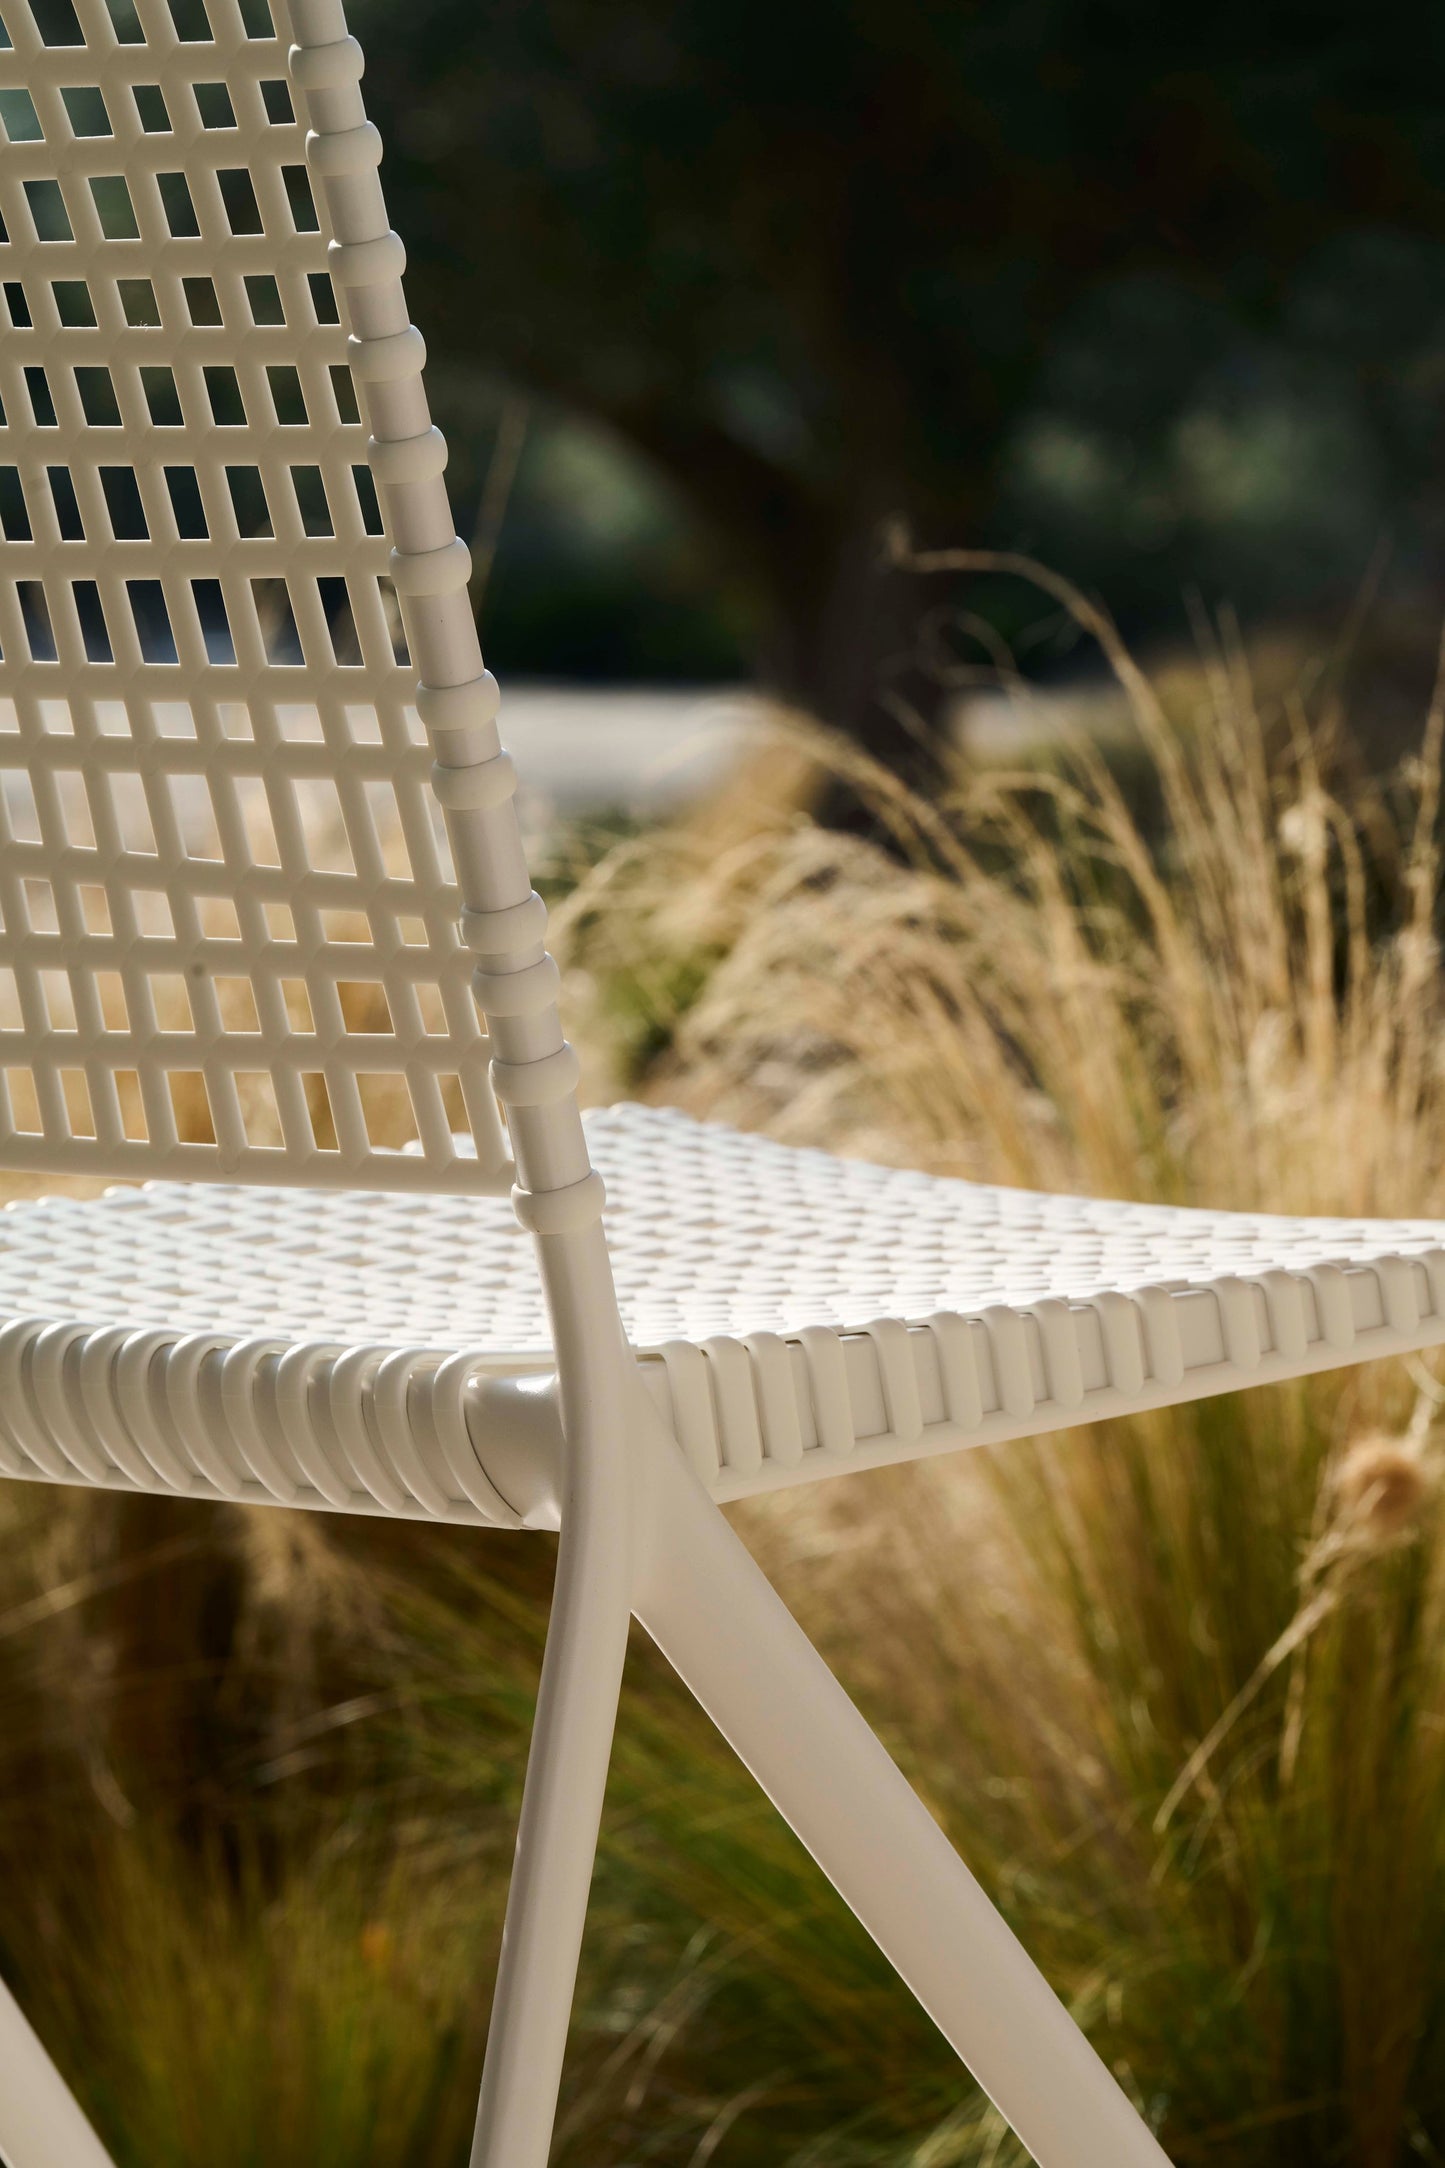 Tribu Branch Outdoor Dining Chair